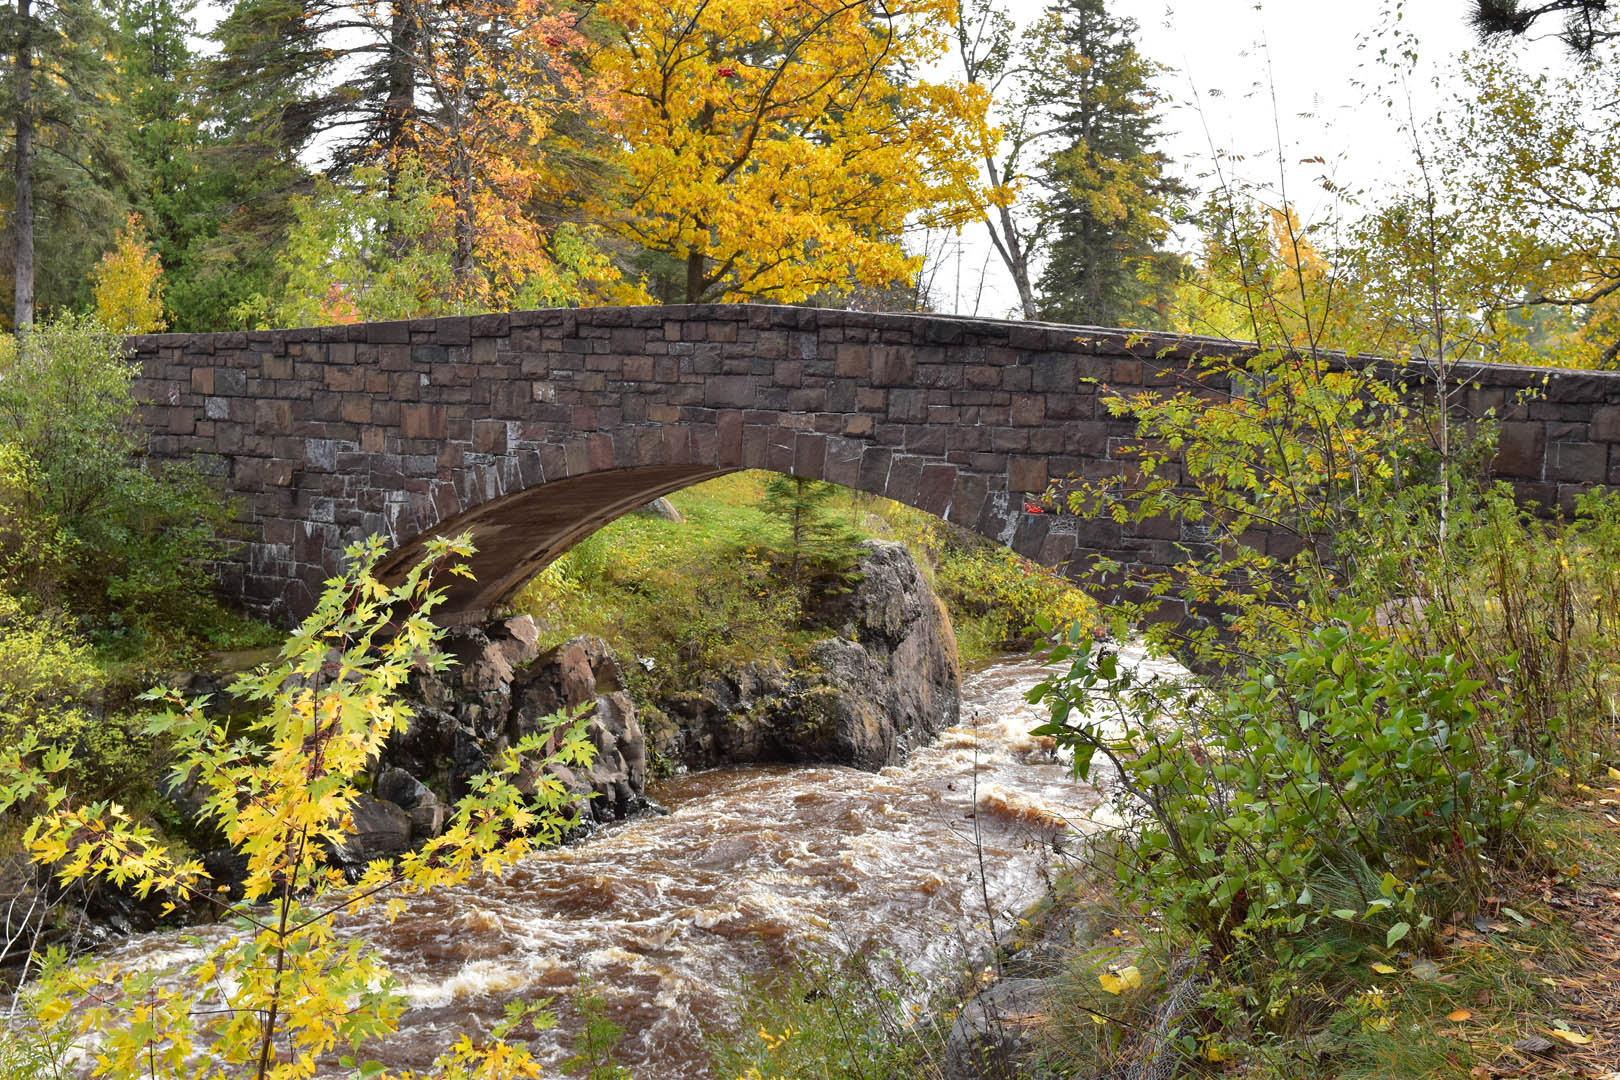 Looking up at an arched bridge along a rapidly flowing Lester River in autumn.